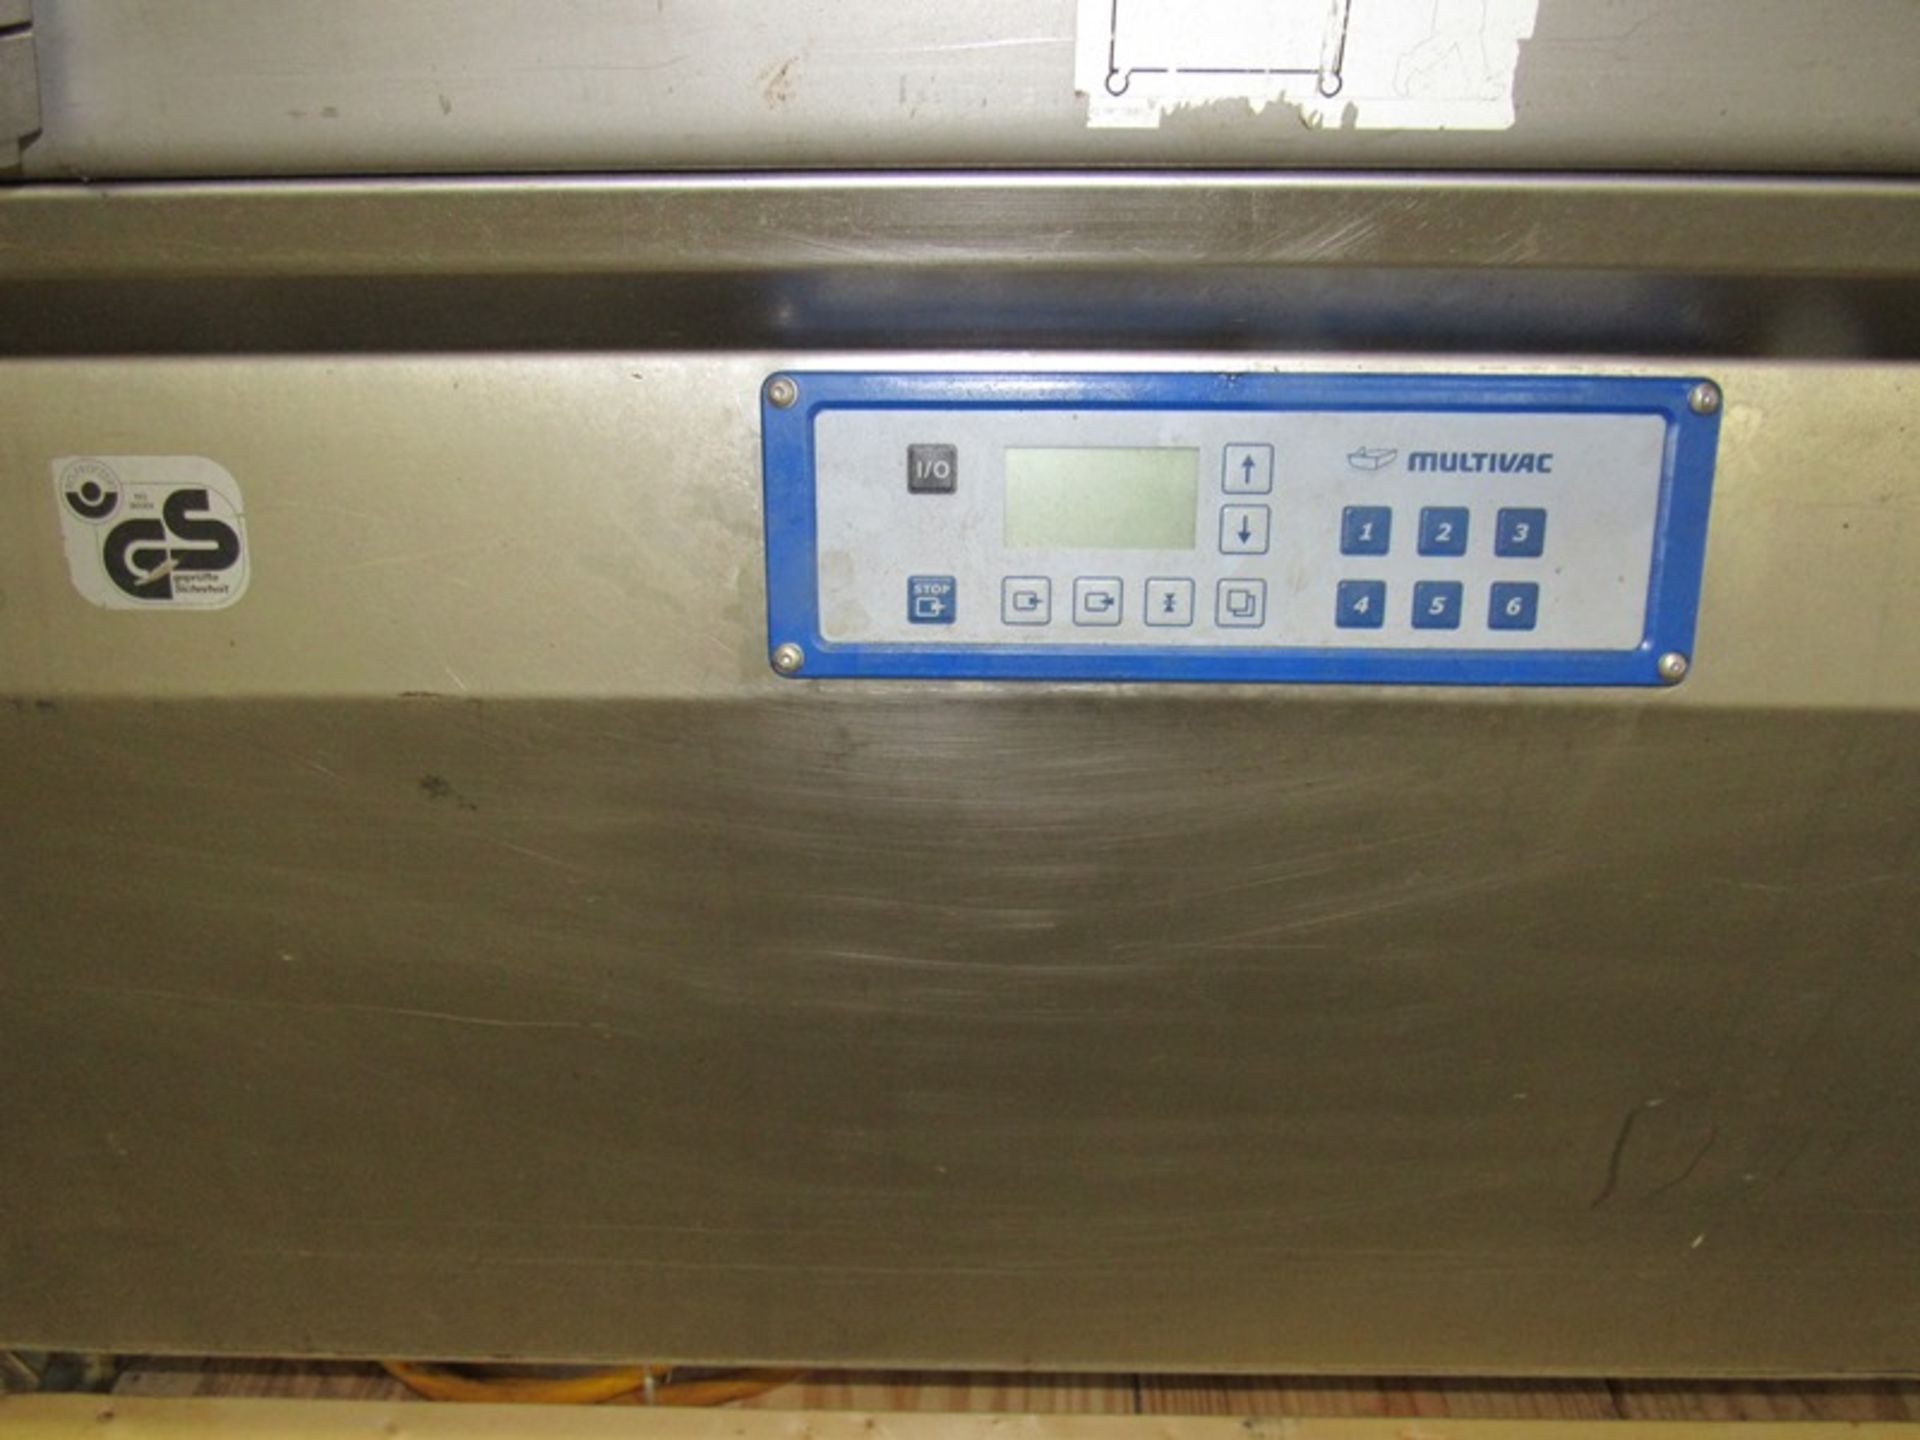 Multivac Mdl. C500 Double Chamber Vacuum Packaging Machine, Ser. #1354, 220 volts, 3 phase, Busch - Image 9 of 12